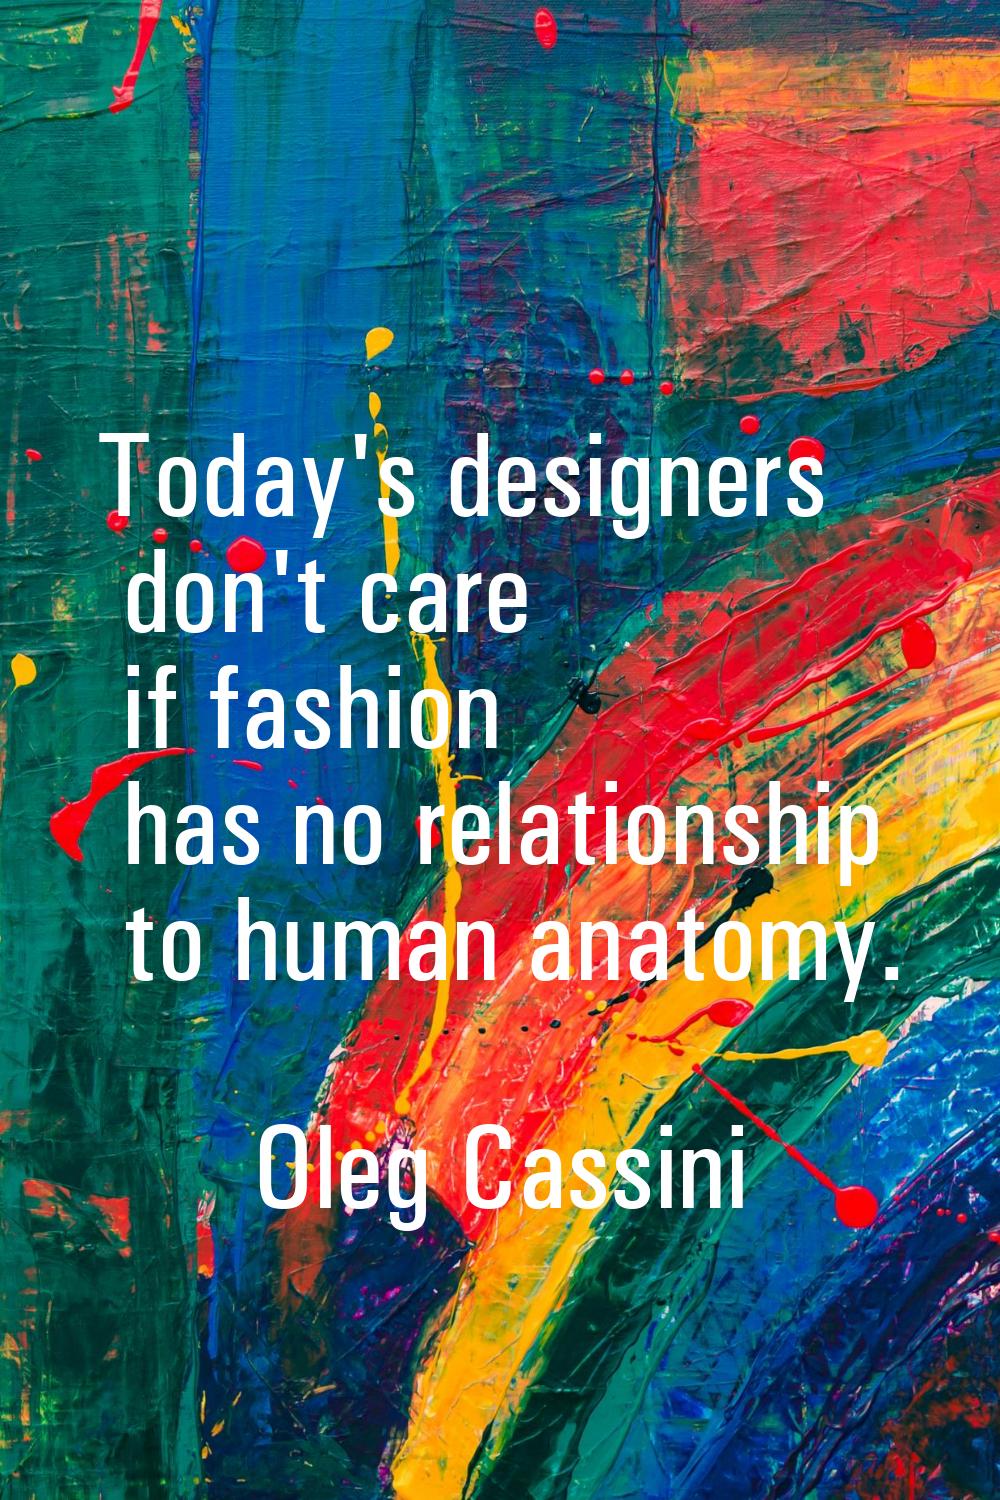 Today's designers don't care if fashion has no relationship to human anatomy.